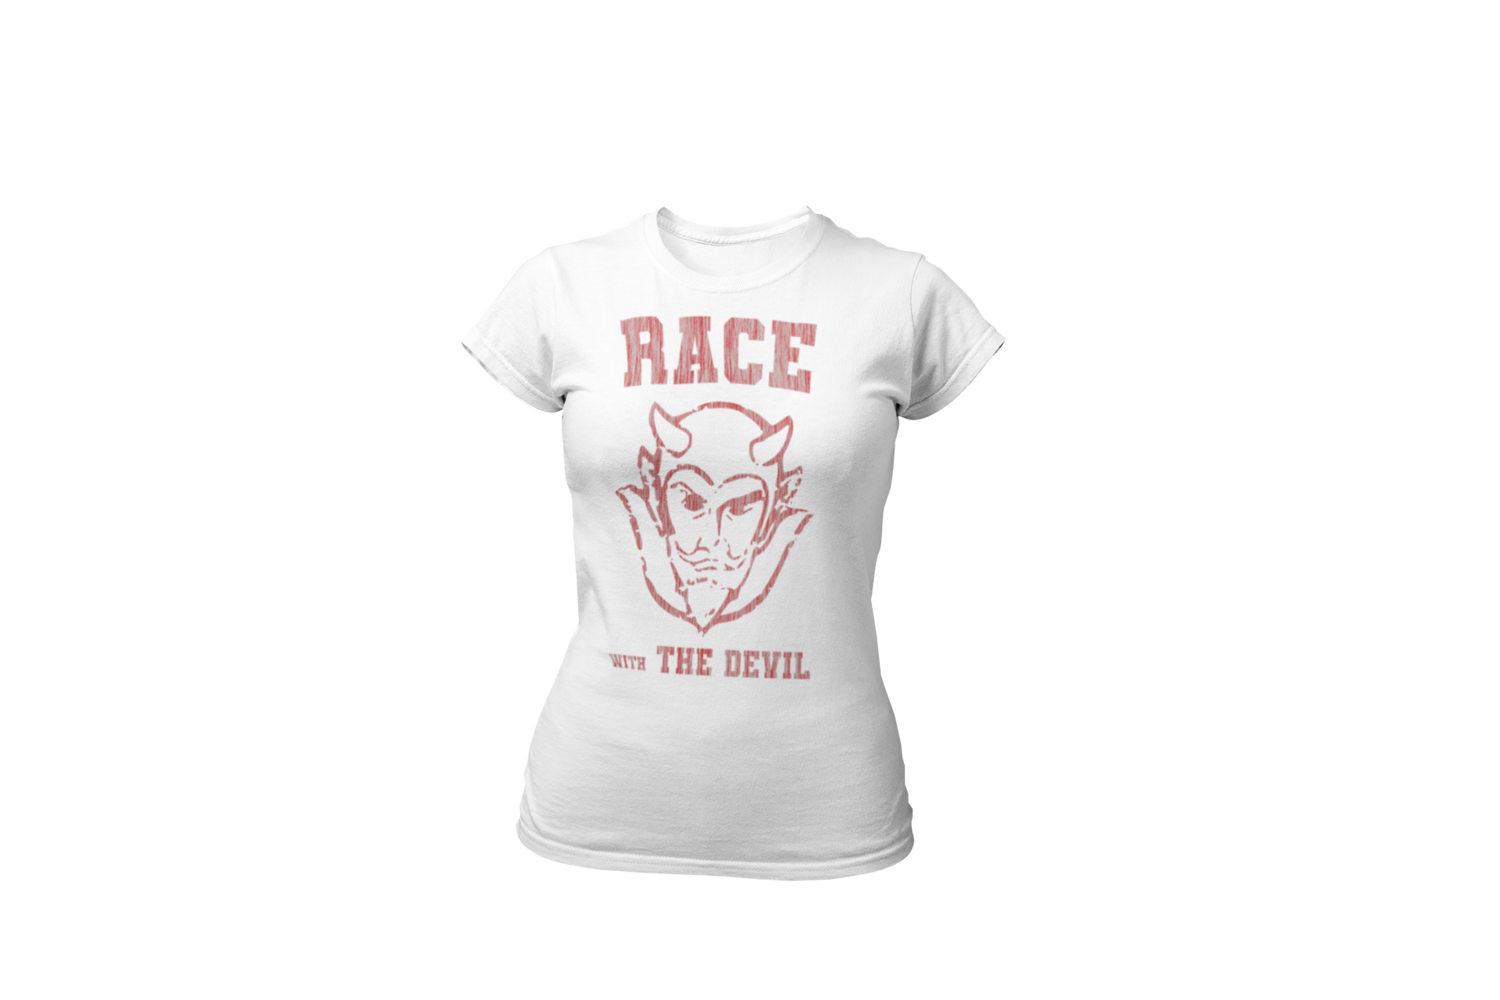 RACE WITH THE DEVIL Tshirt WOMAN